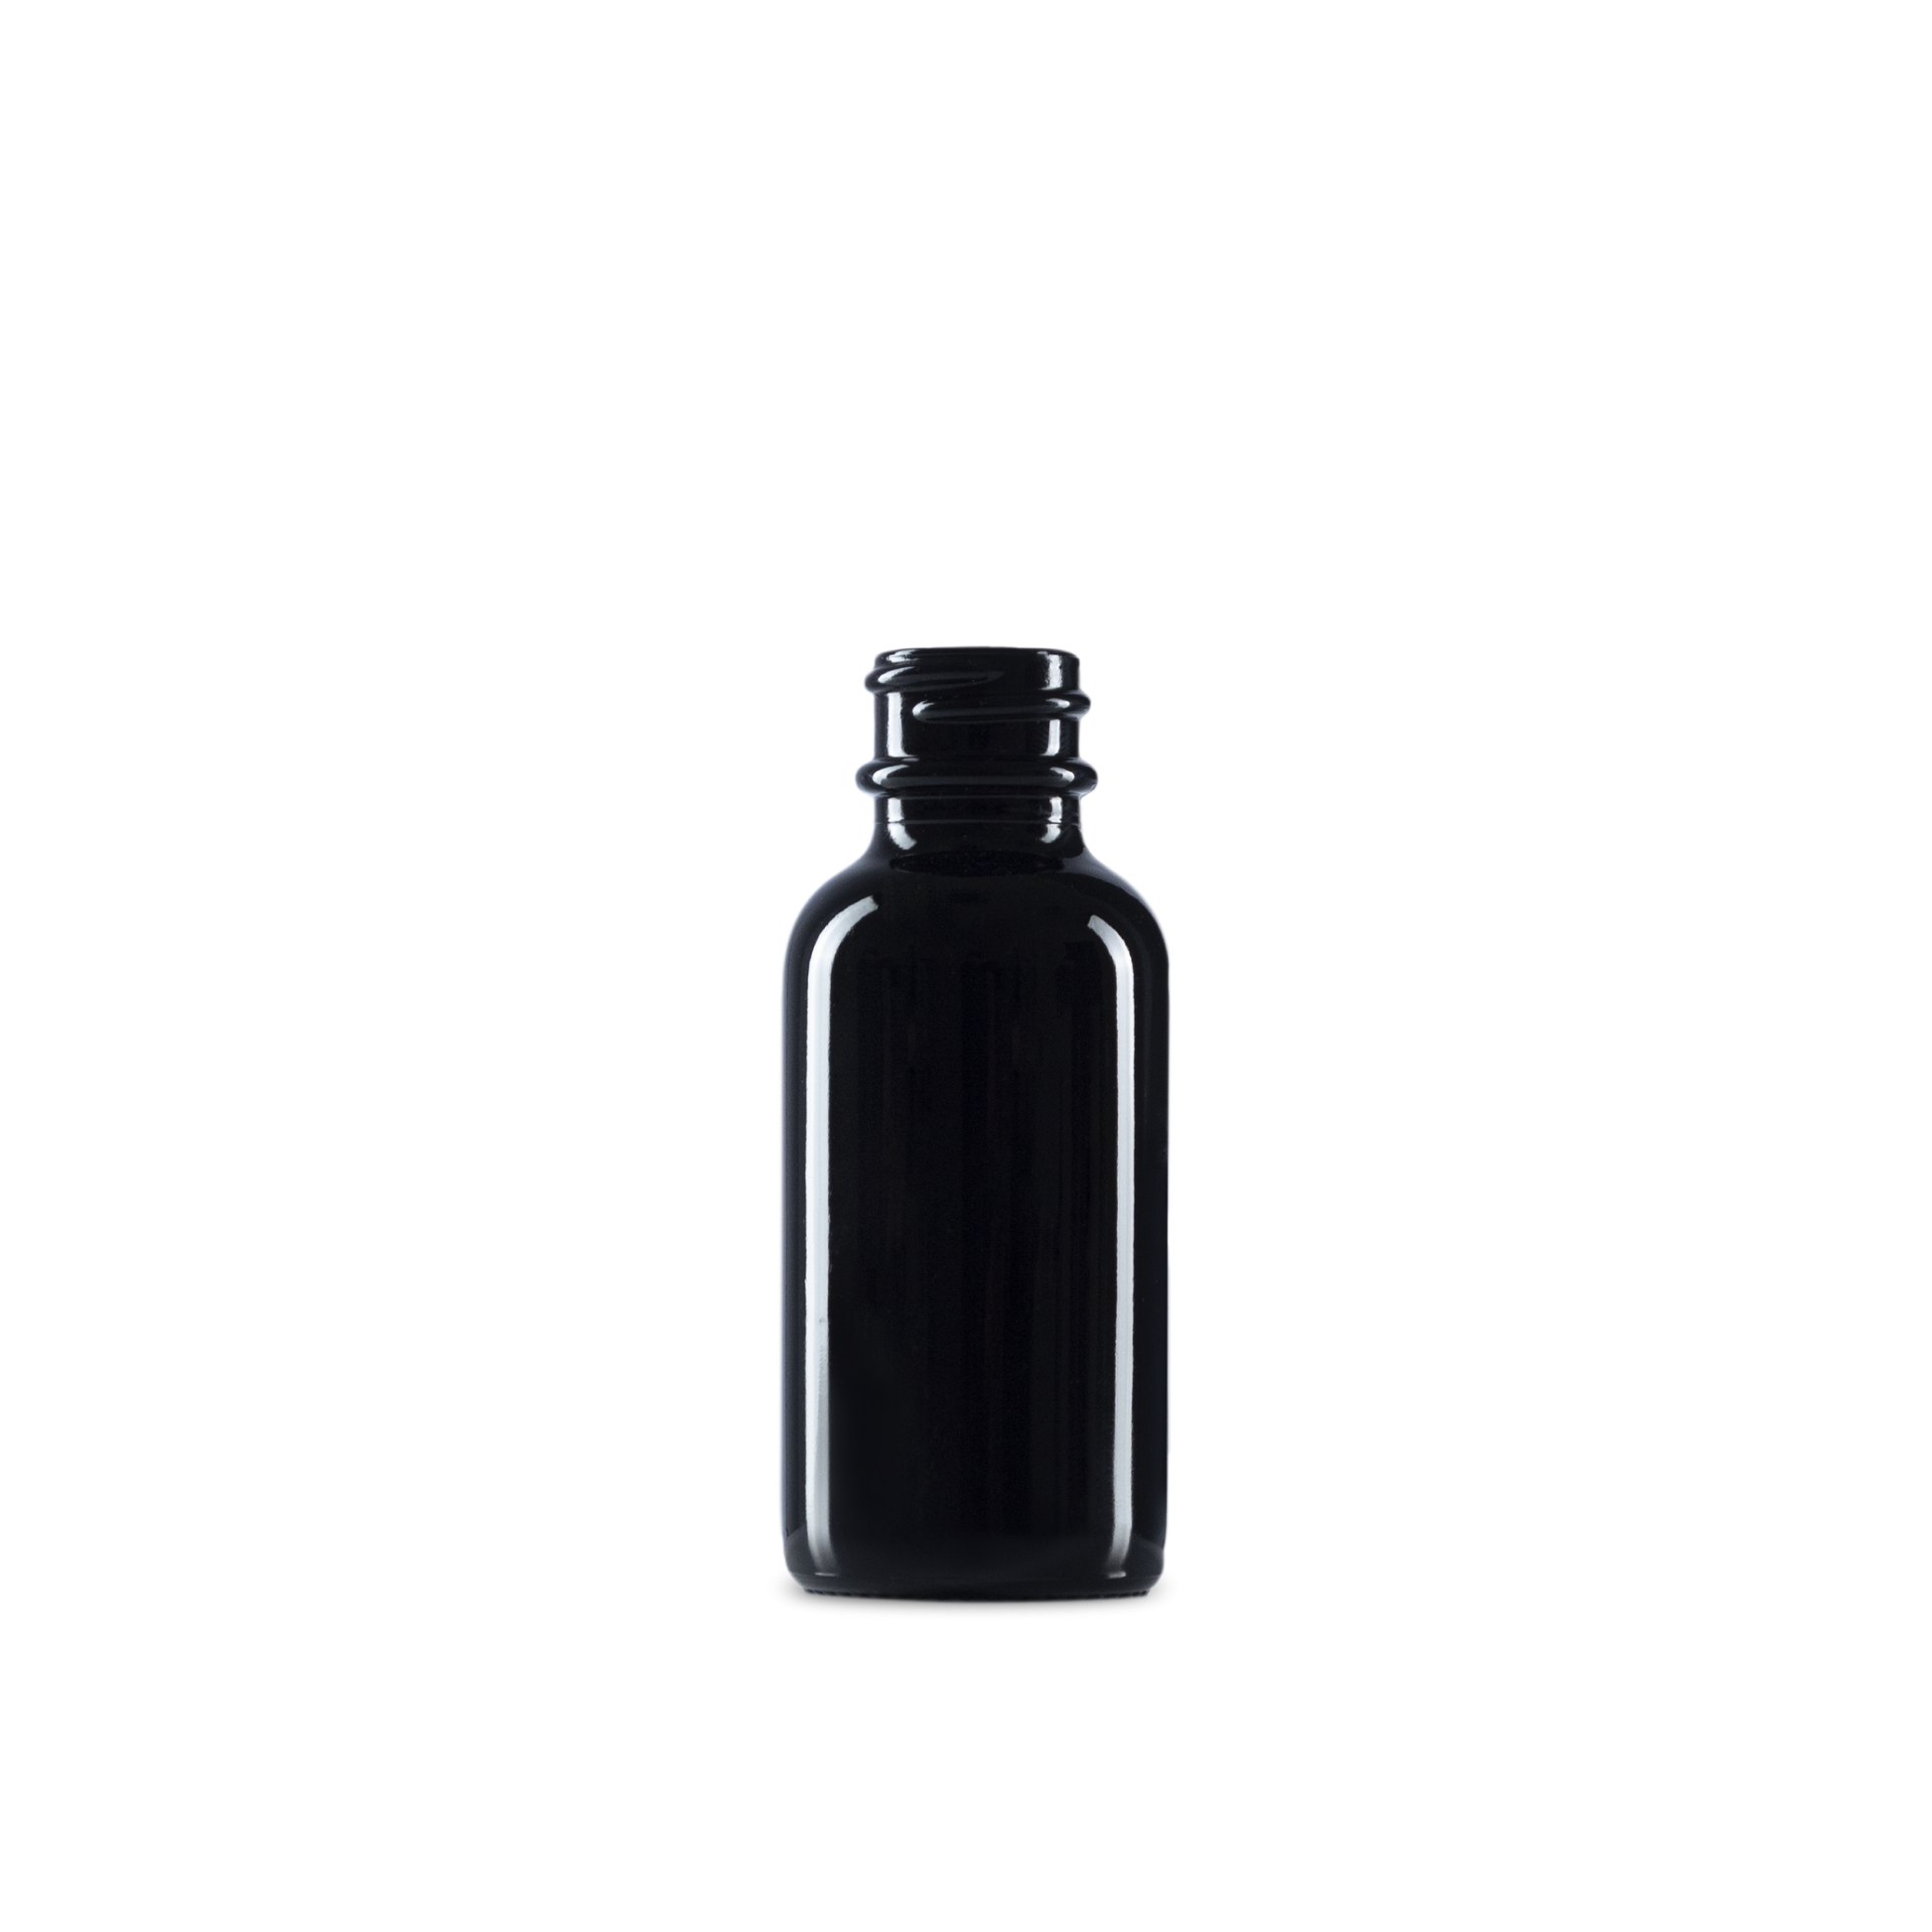 1 oz black uv glass bottle protect the product from light degradation. the cap can be tightened to ensure that the contents stay fresh.